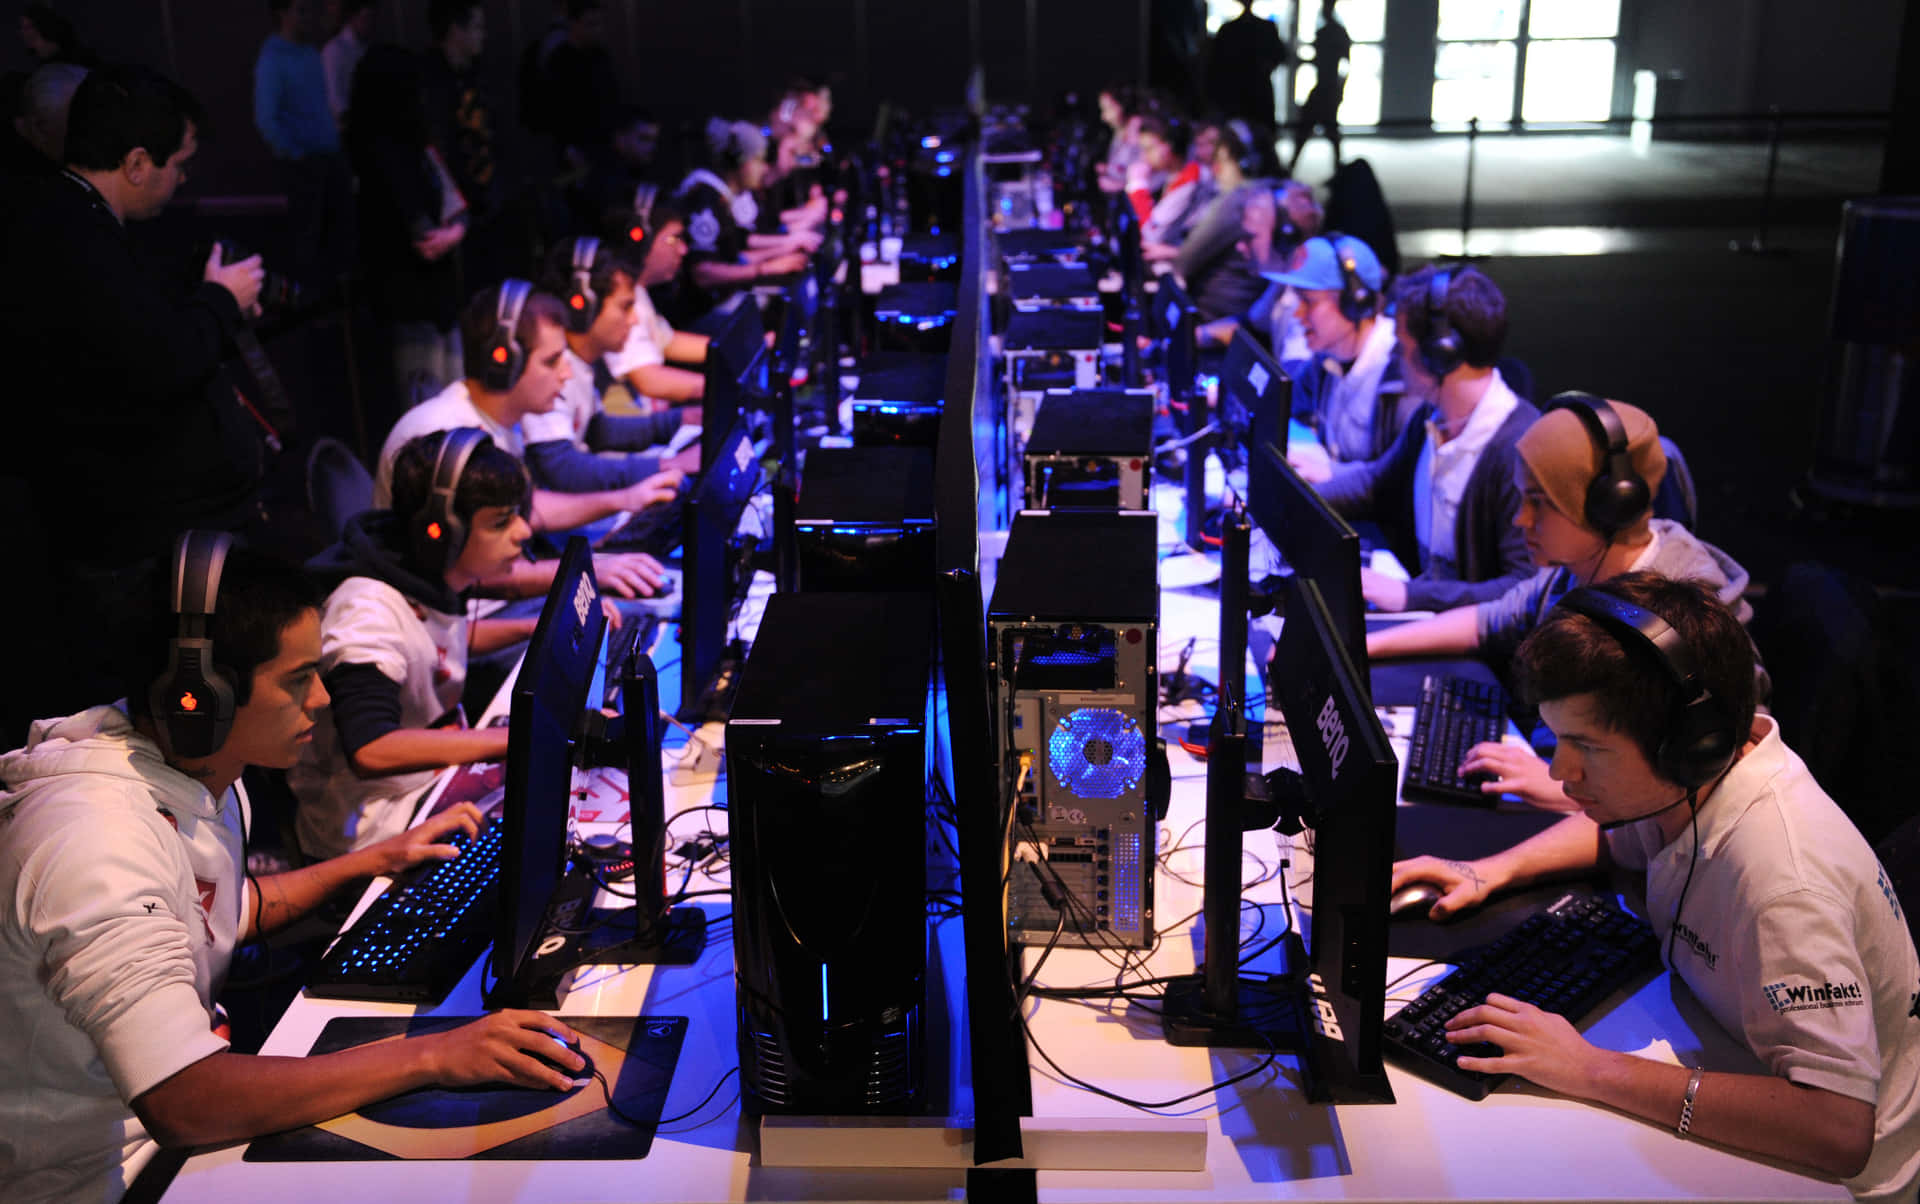 Attendees at the Annual Gaming Tournaments of 2015 Wallpaper